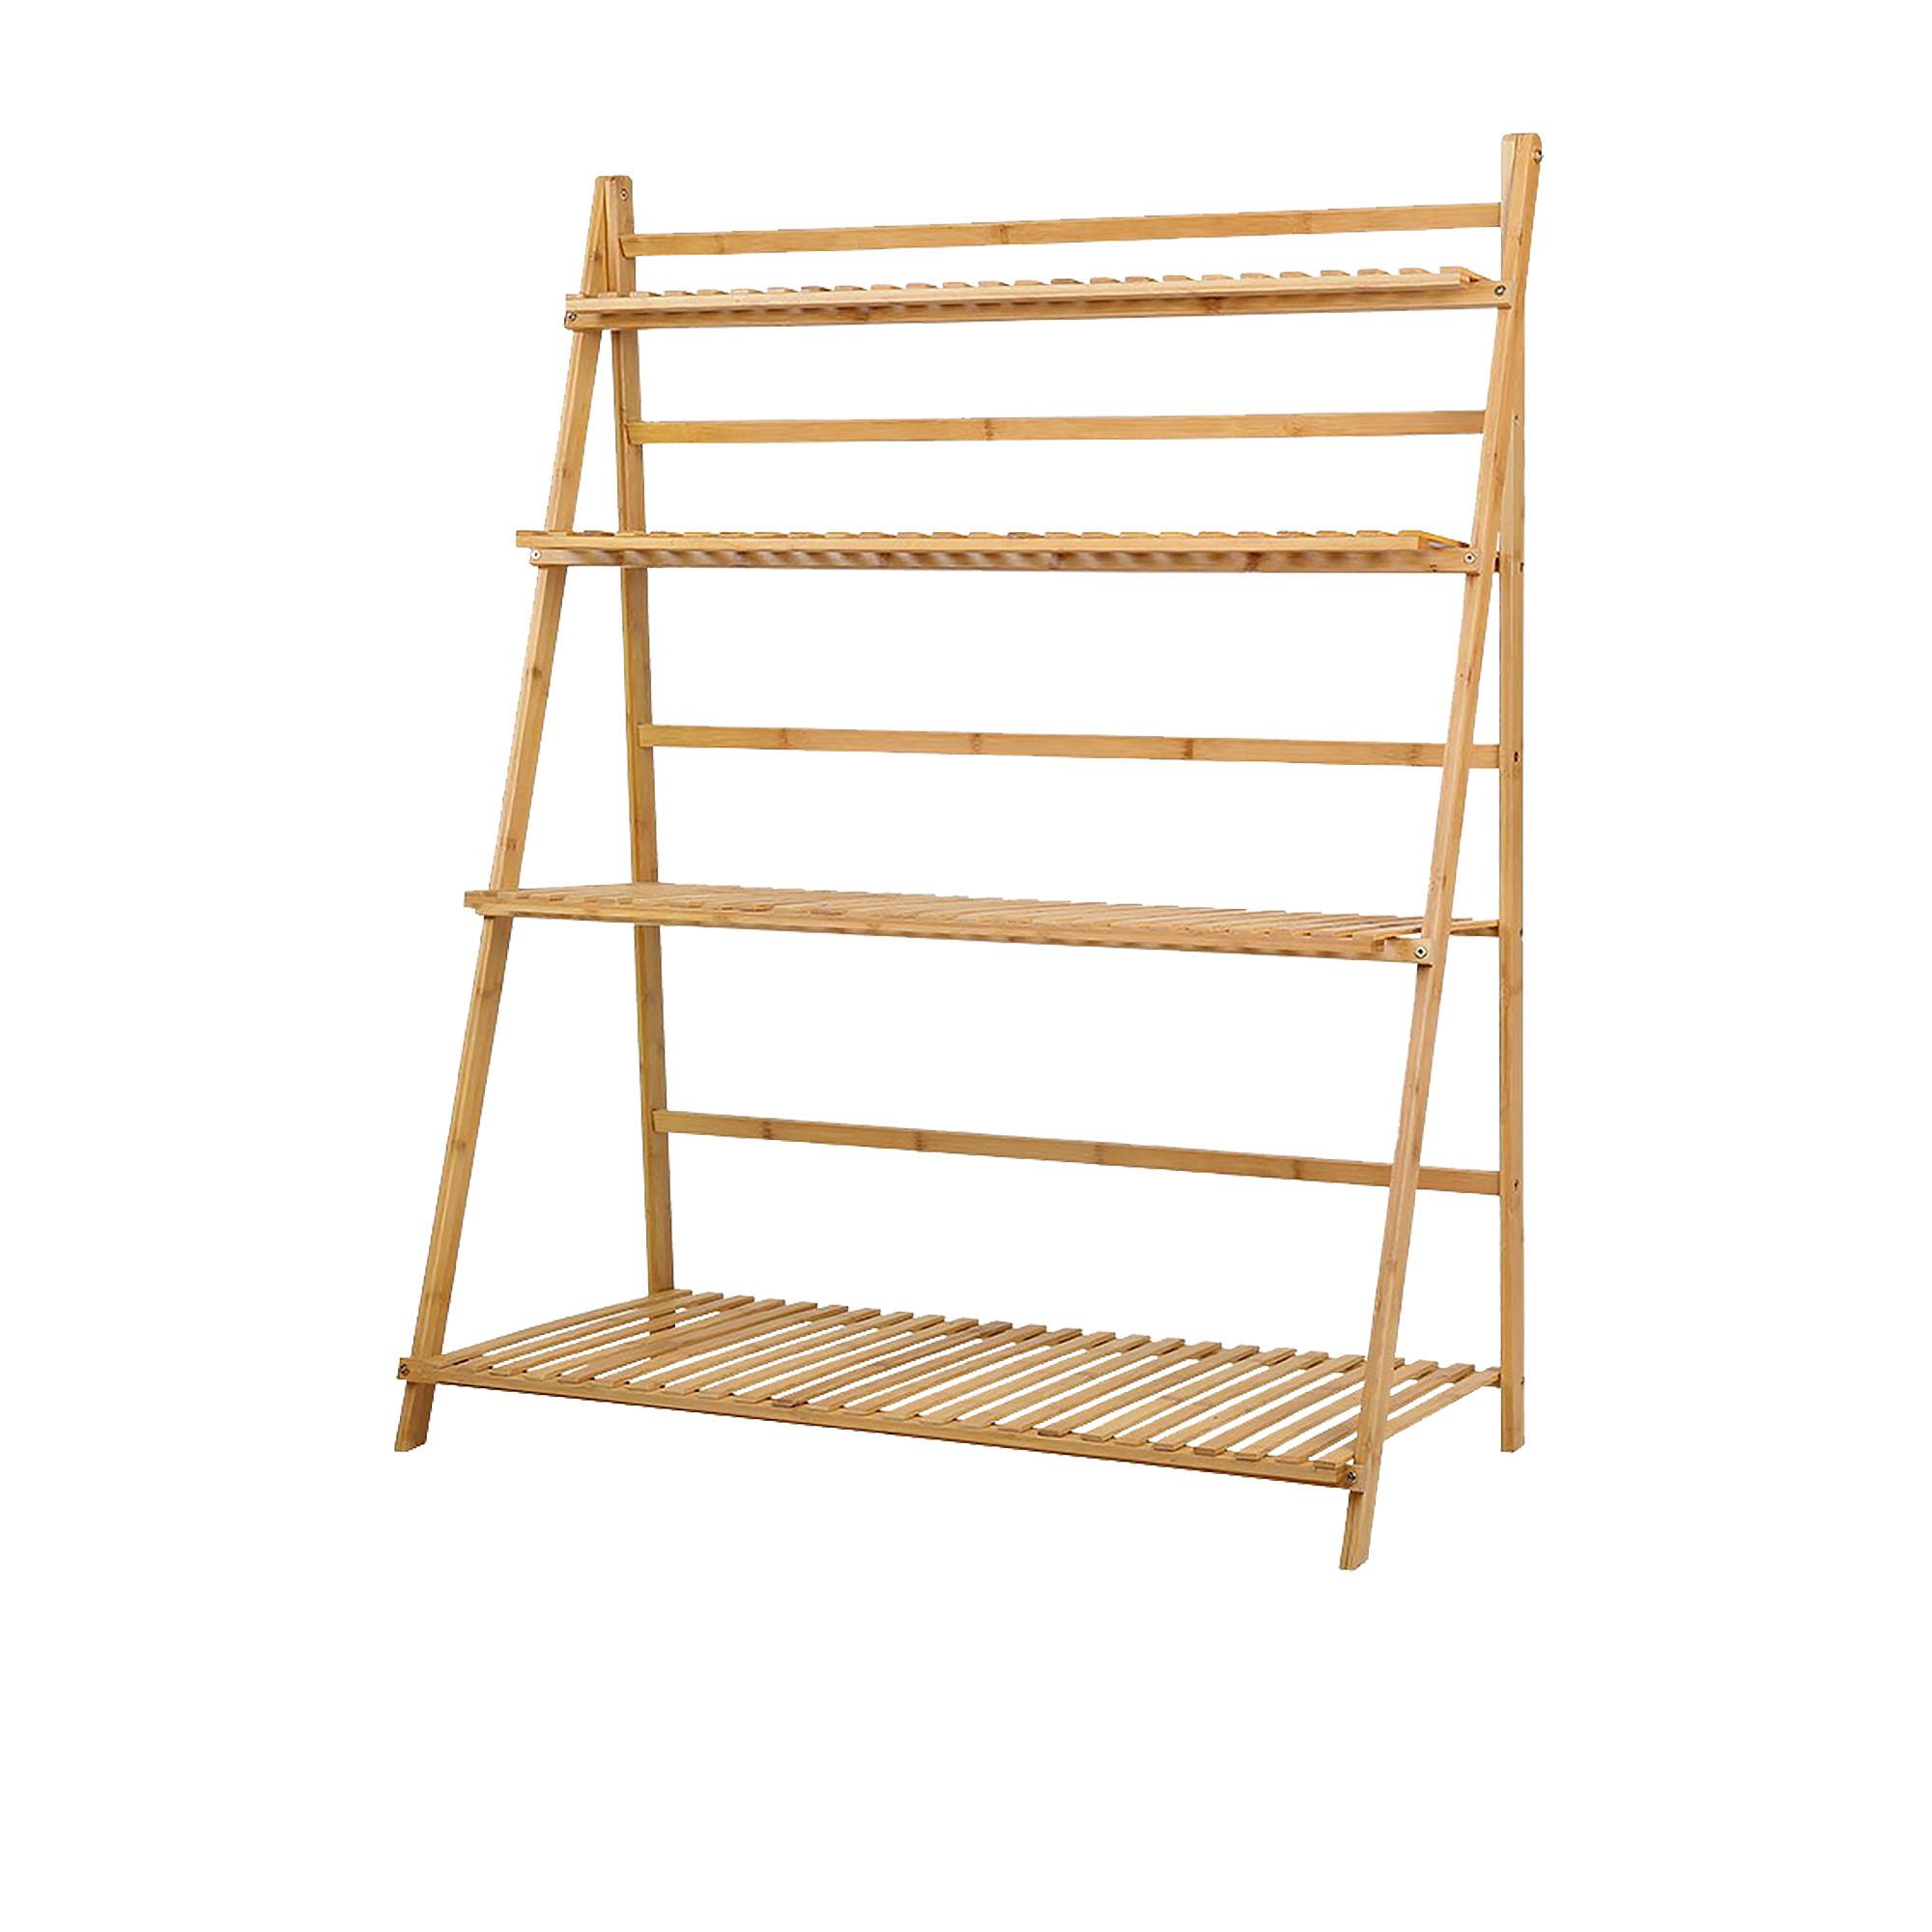 Artiss Bamboo Foldable 4 Tier Planter Stand Image 1